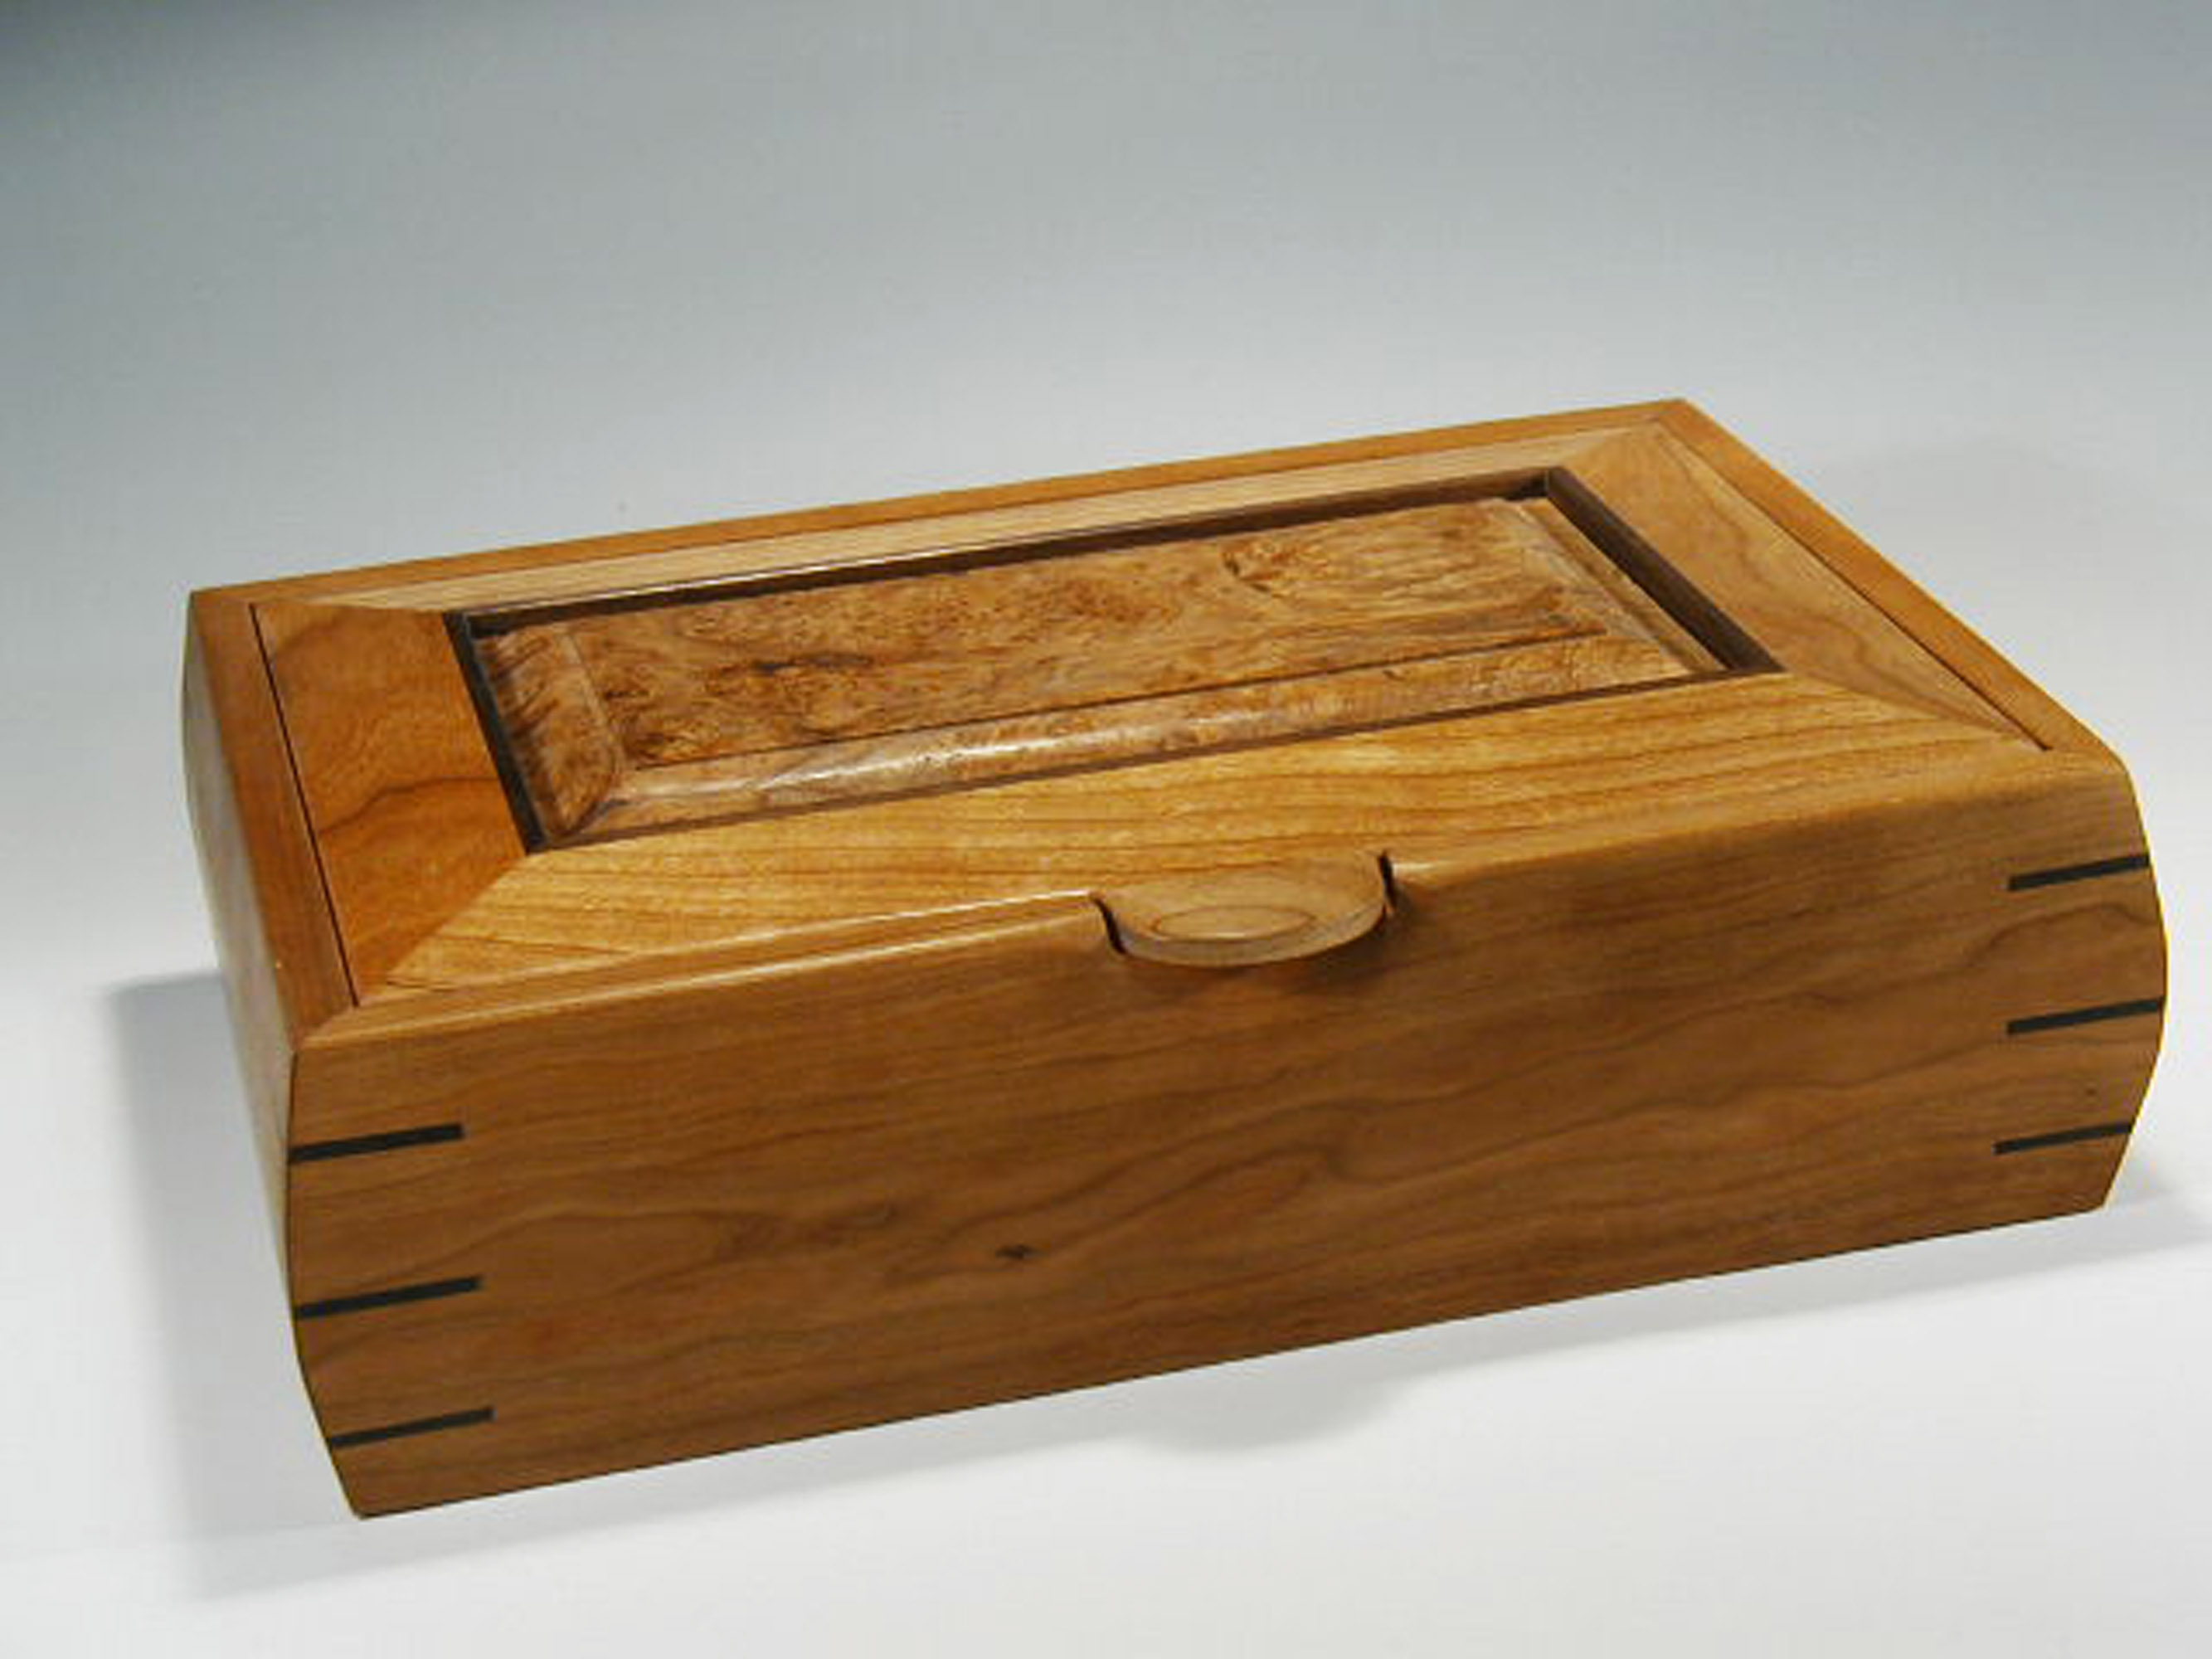 This is one of my handmade wooden boxes that can be used as a watch jewelry box; it is made of cherry wood.